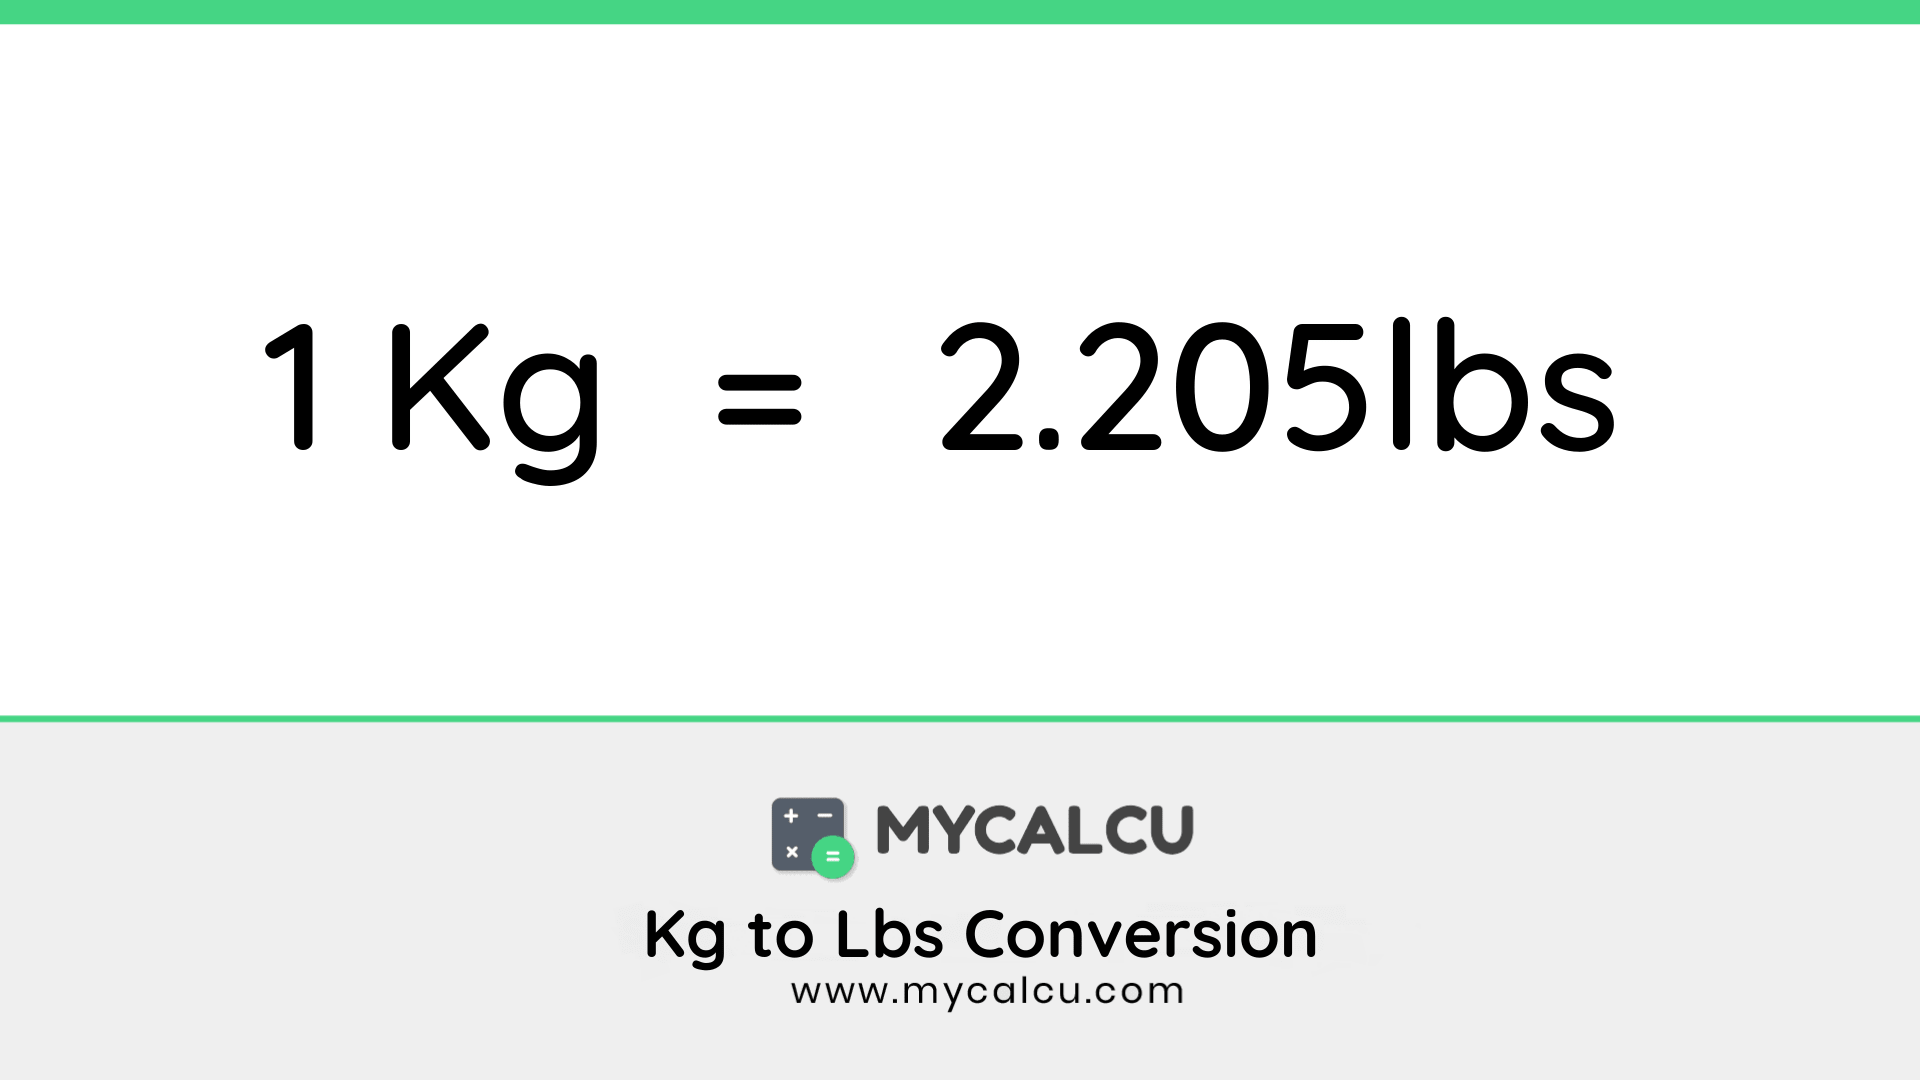 kg to lbs - Weight Conversion - MyCalcu.com